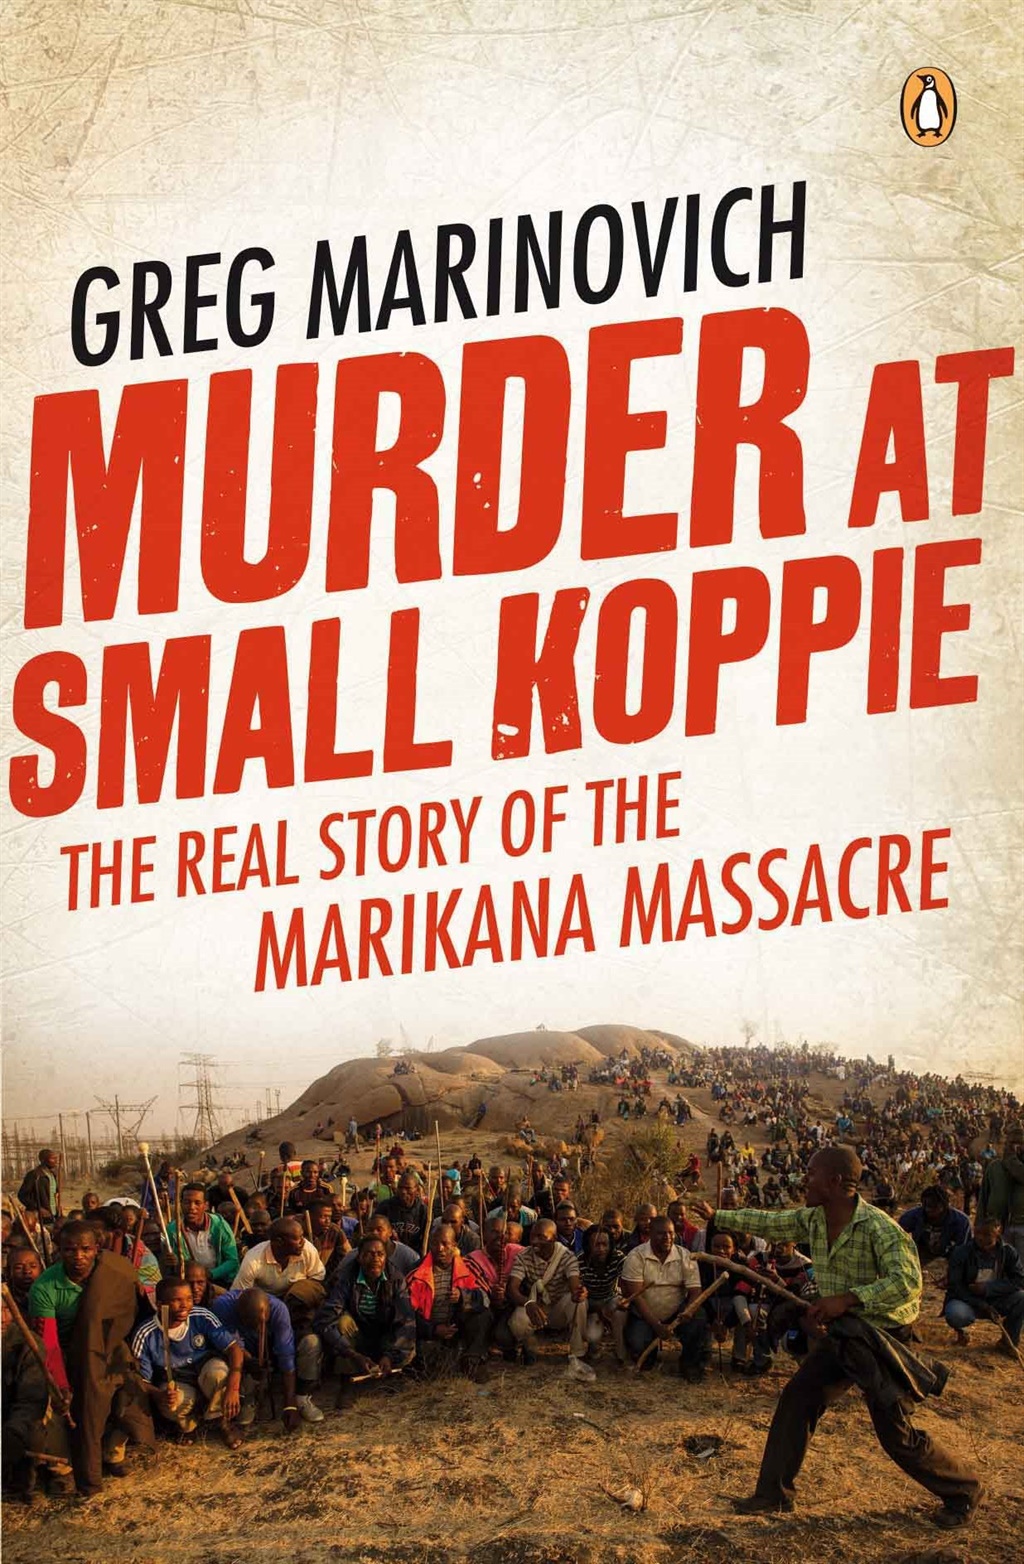 Murder at Small Koppie, by Greg Marinovich (Published by Penguin Random House)